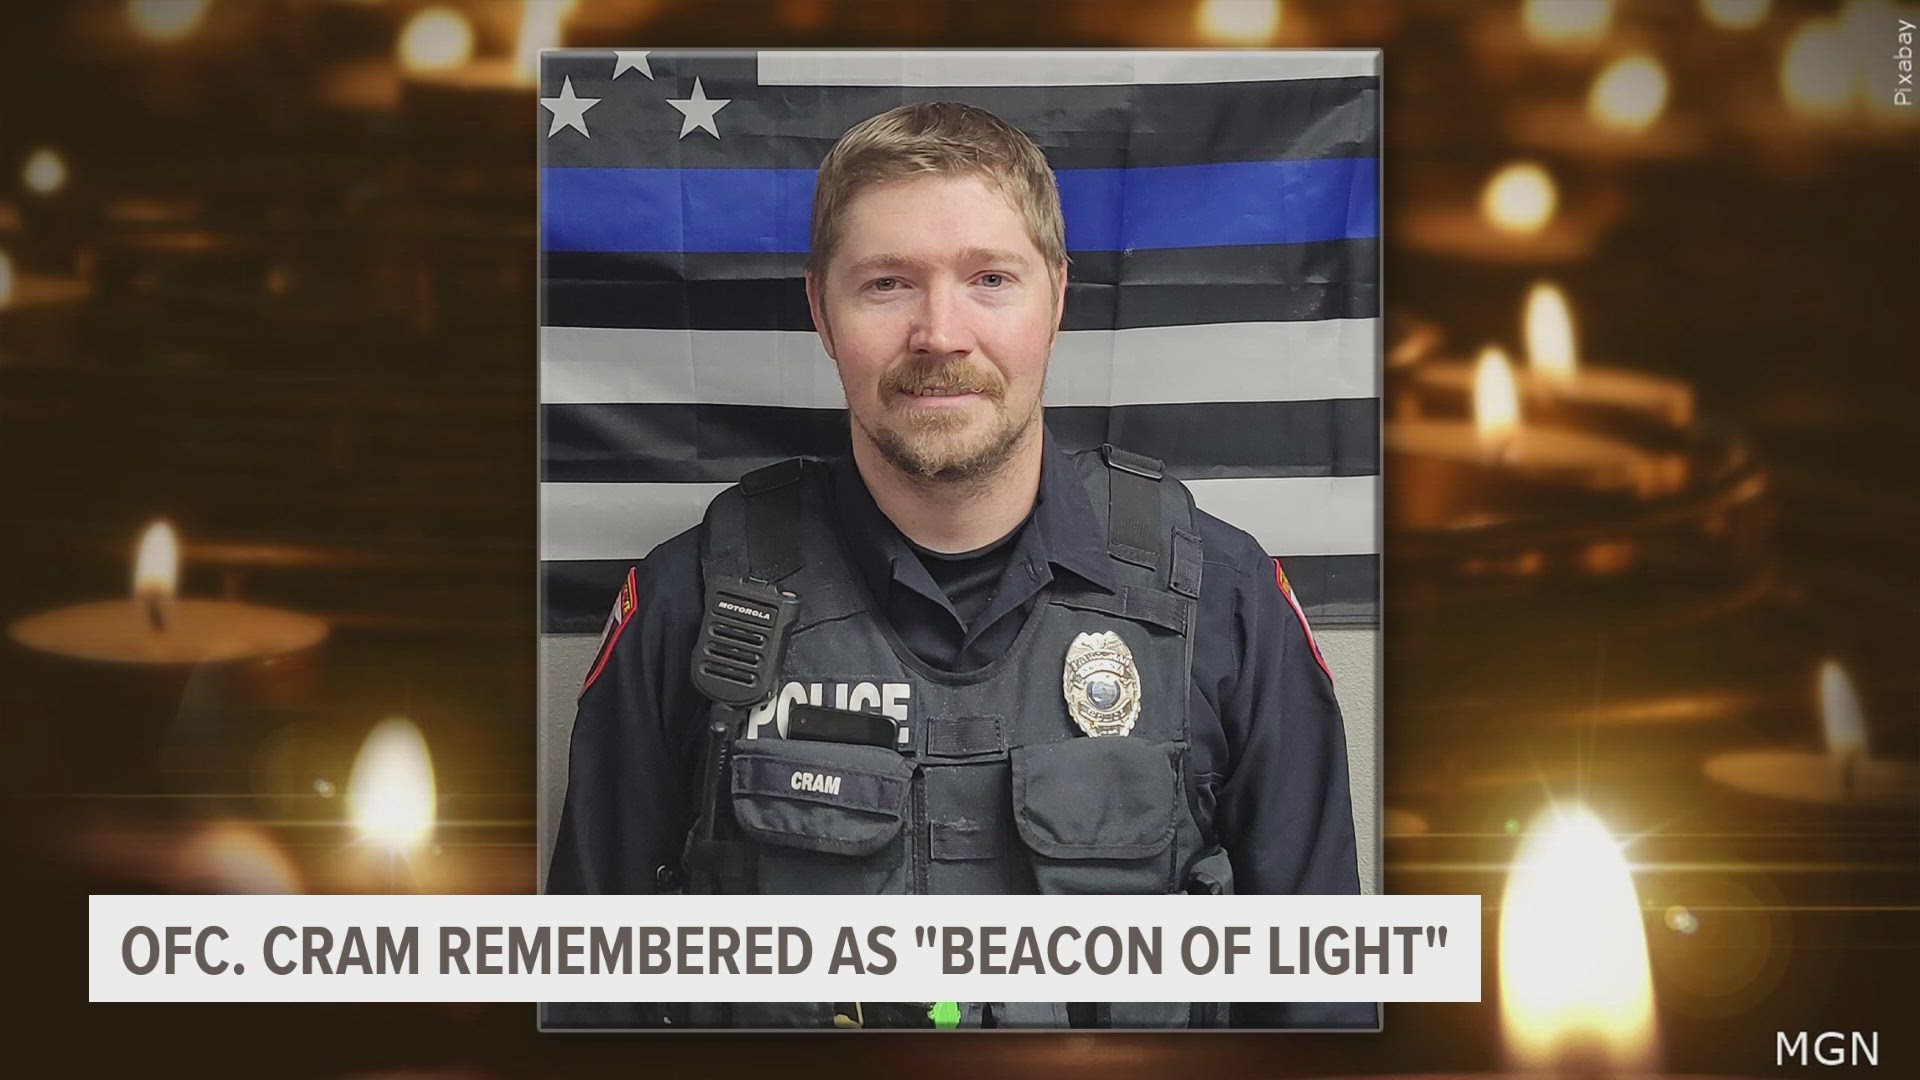 Officer Kevin Cram of the Algona Police Department was shot and killed in the line of duty on Wednesday.